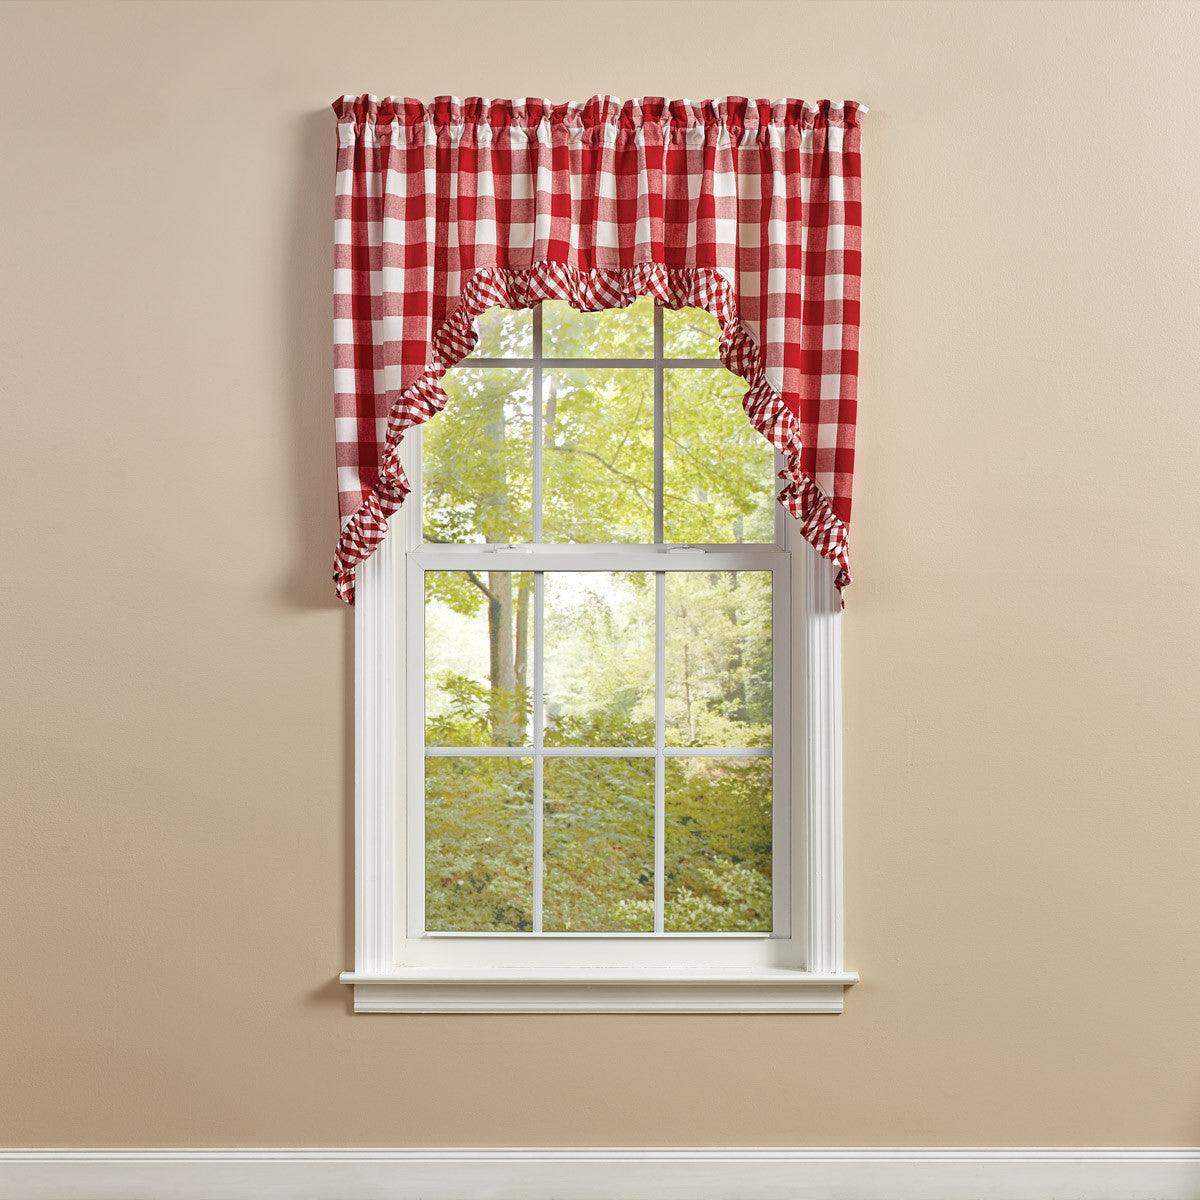 Wicklow Ruffled Swags - Red 72x36 Park Designs - The Fox Decor